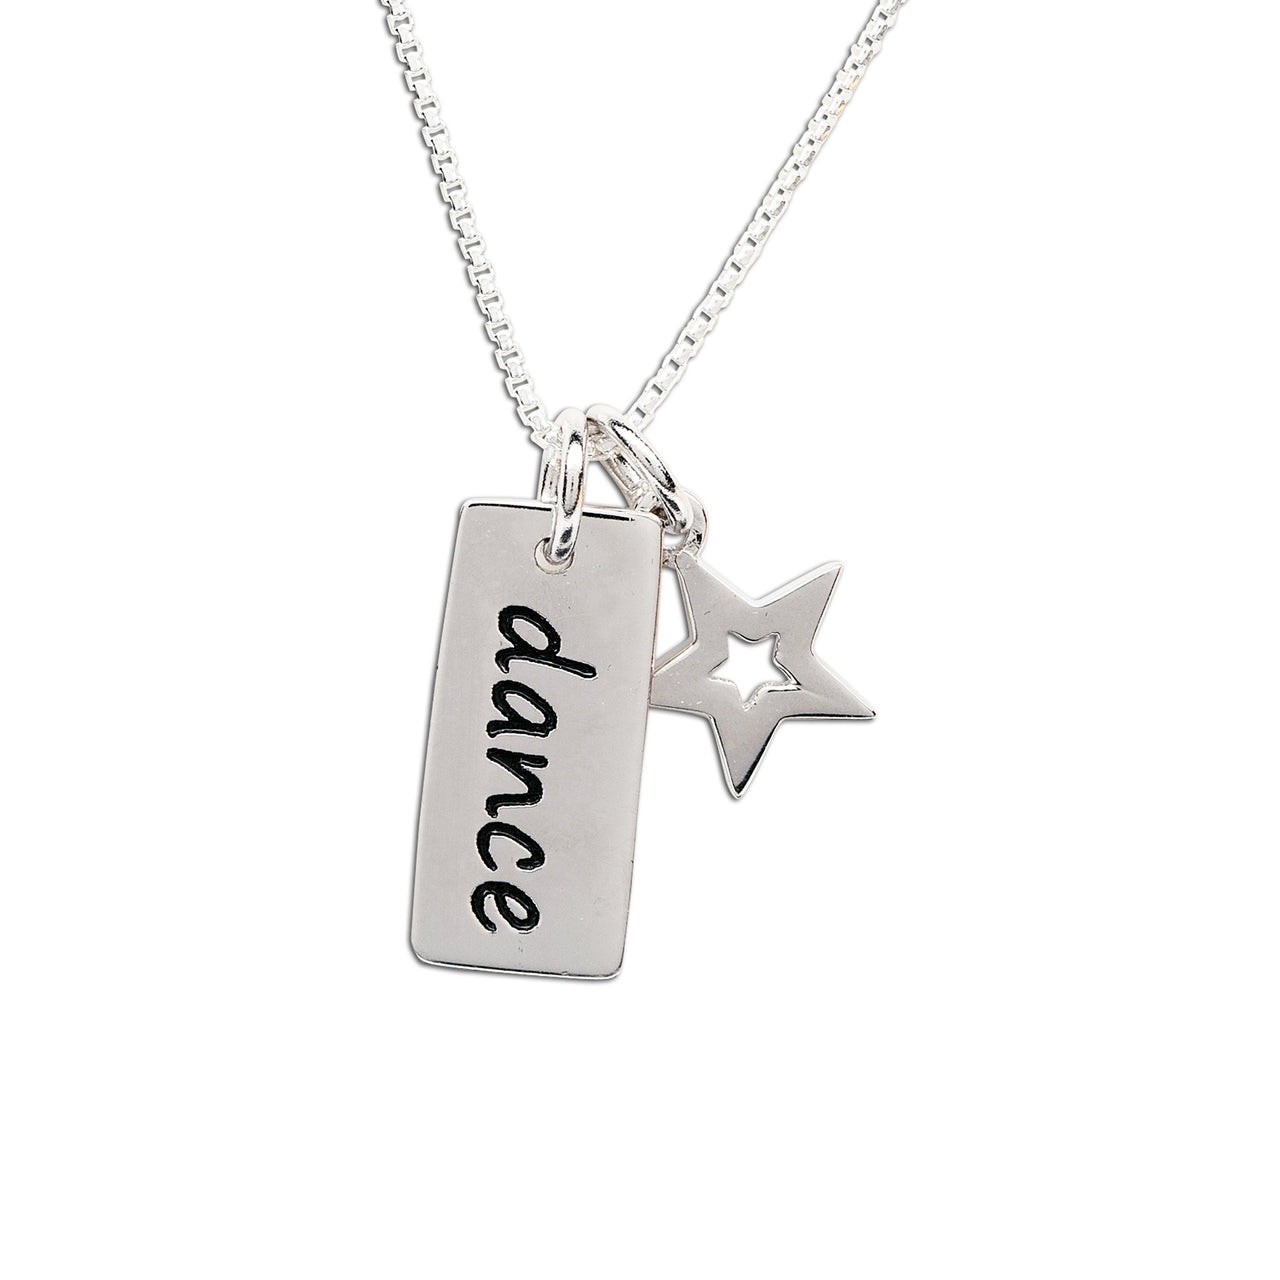 Cherished Moments Sterling Silver Children's Dance Necklace